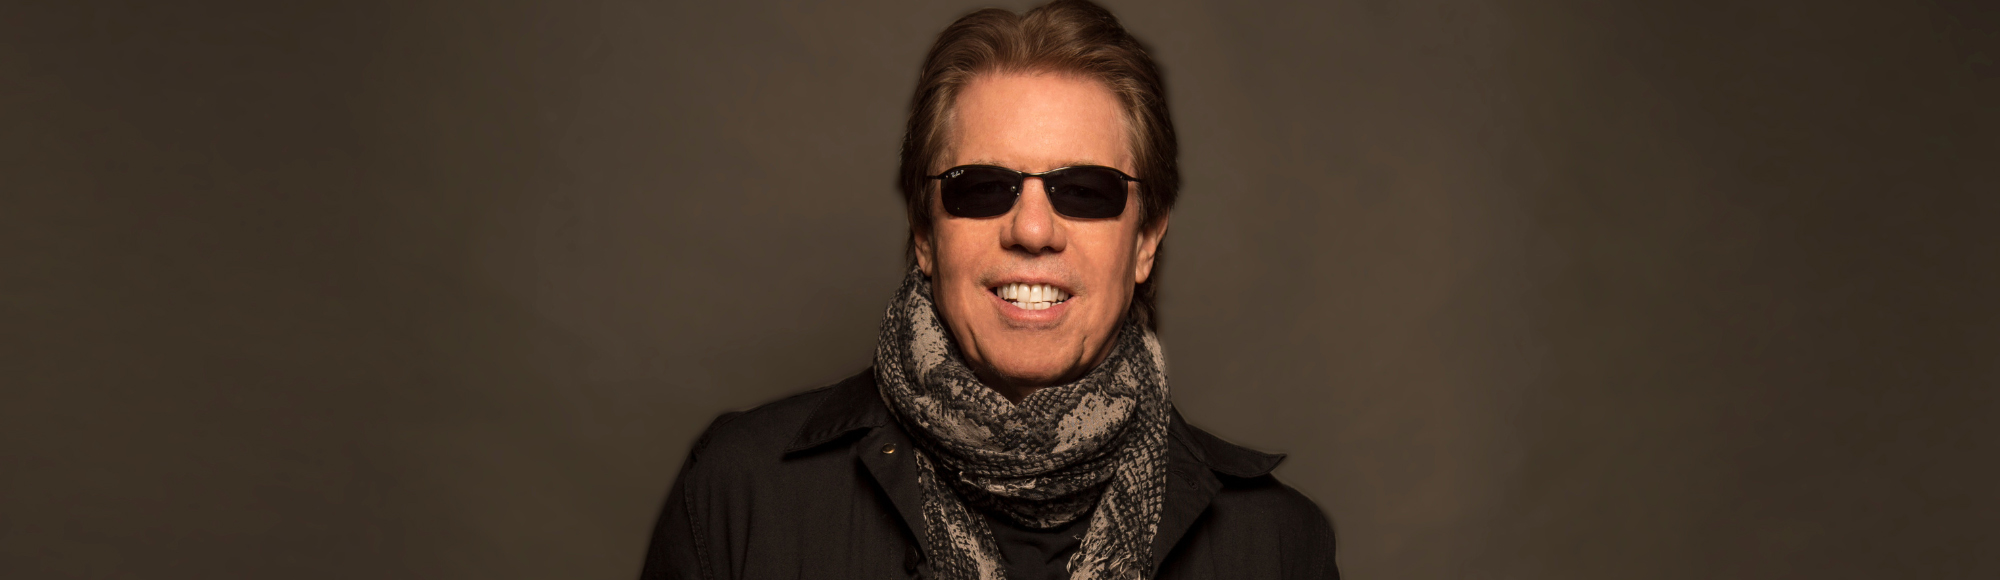 George Thorogood & The Destroyers show